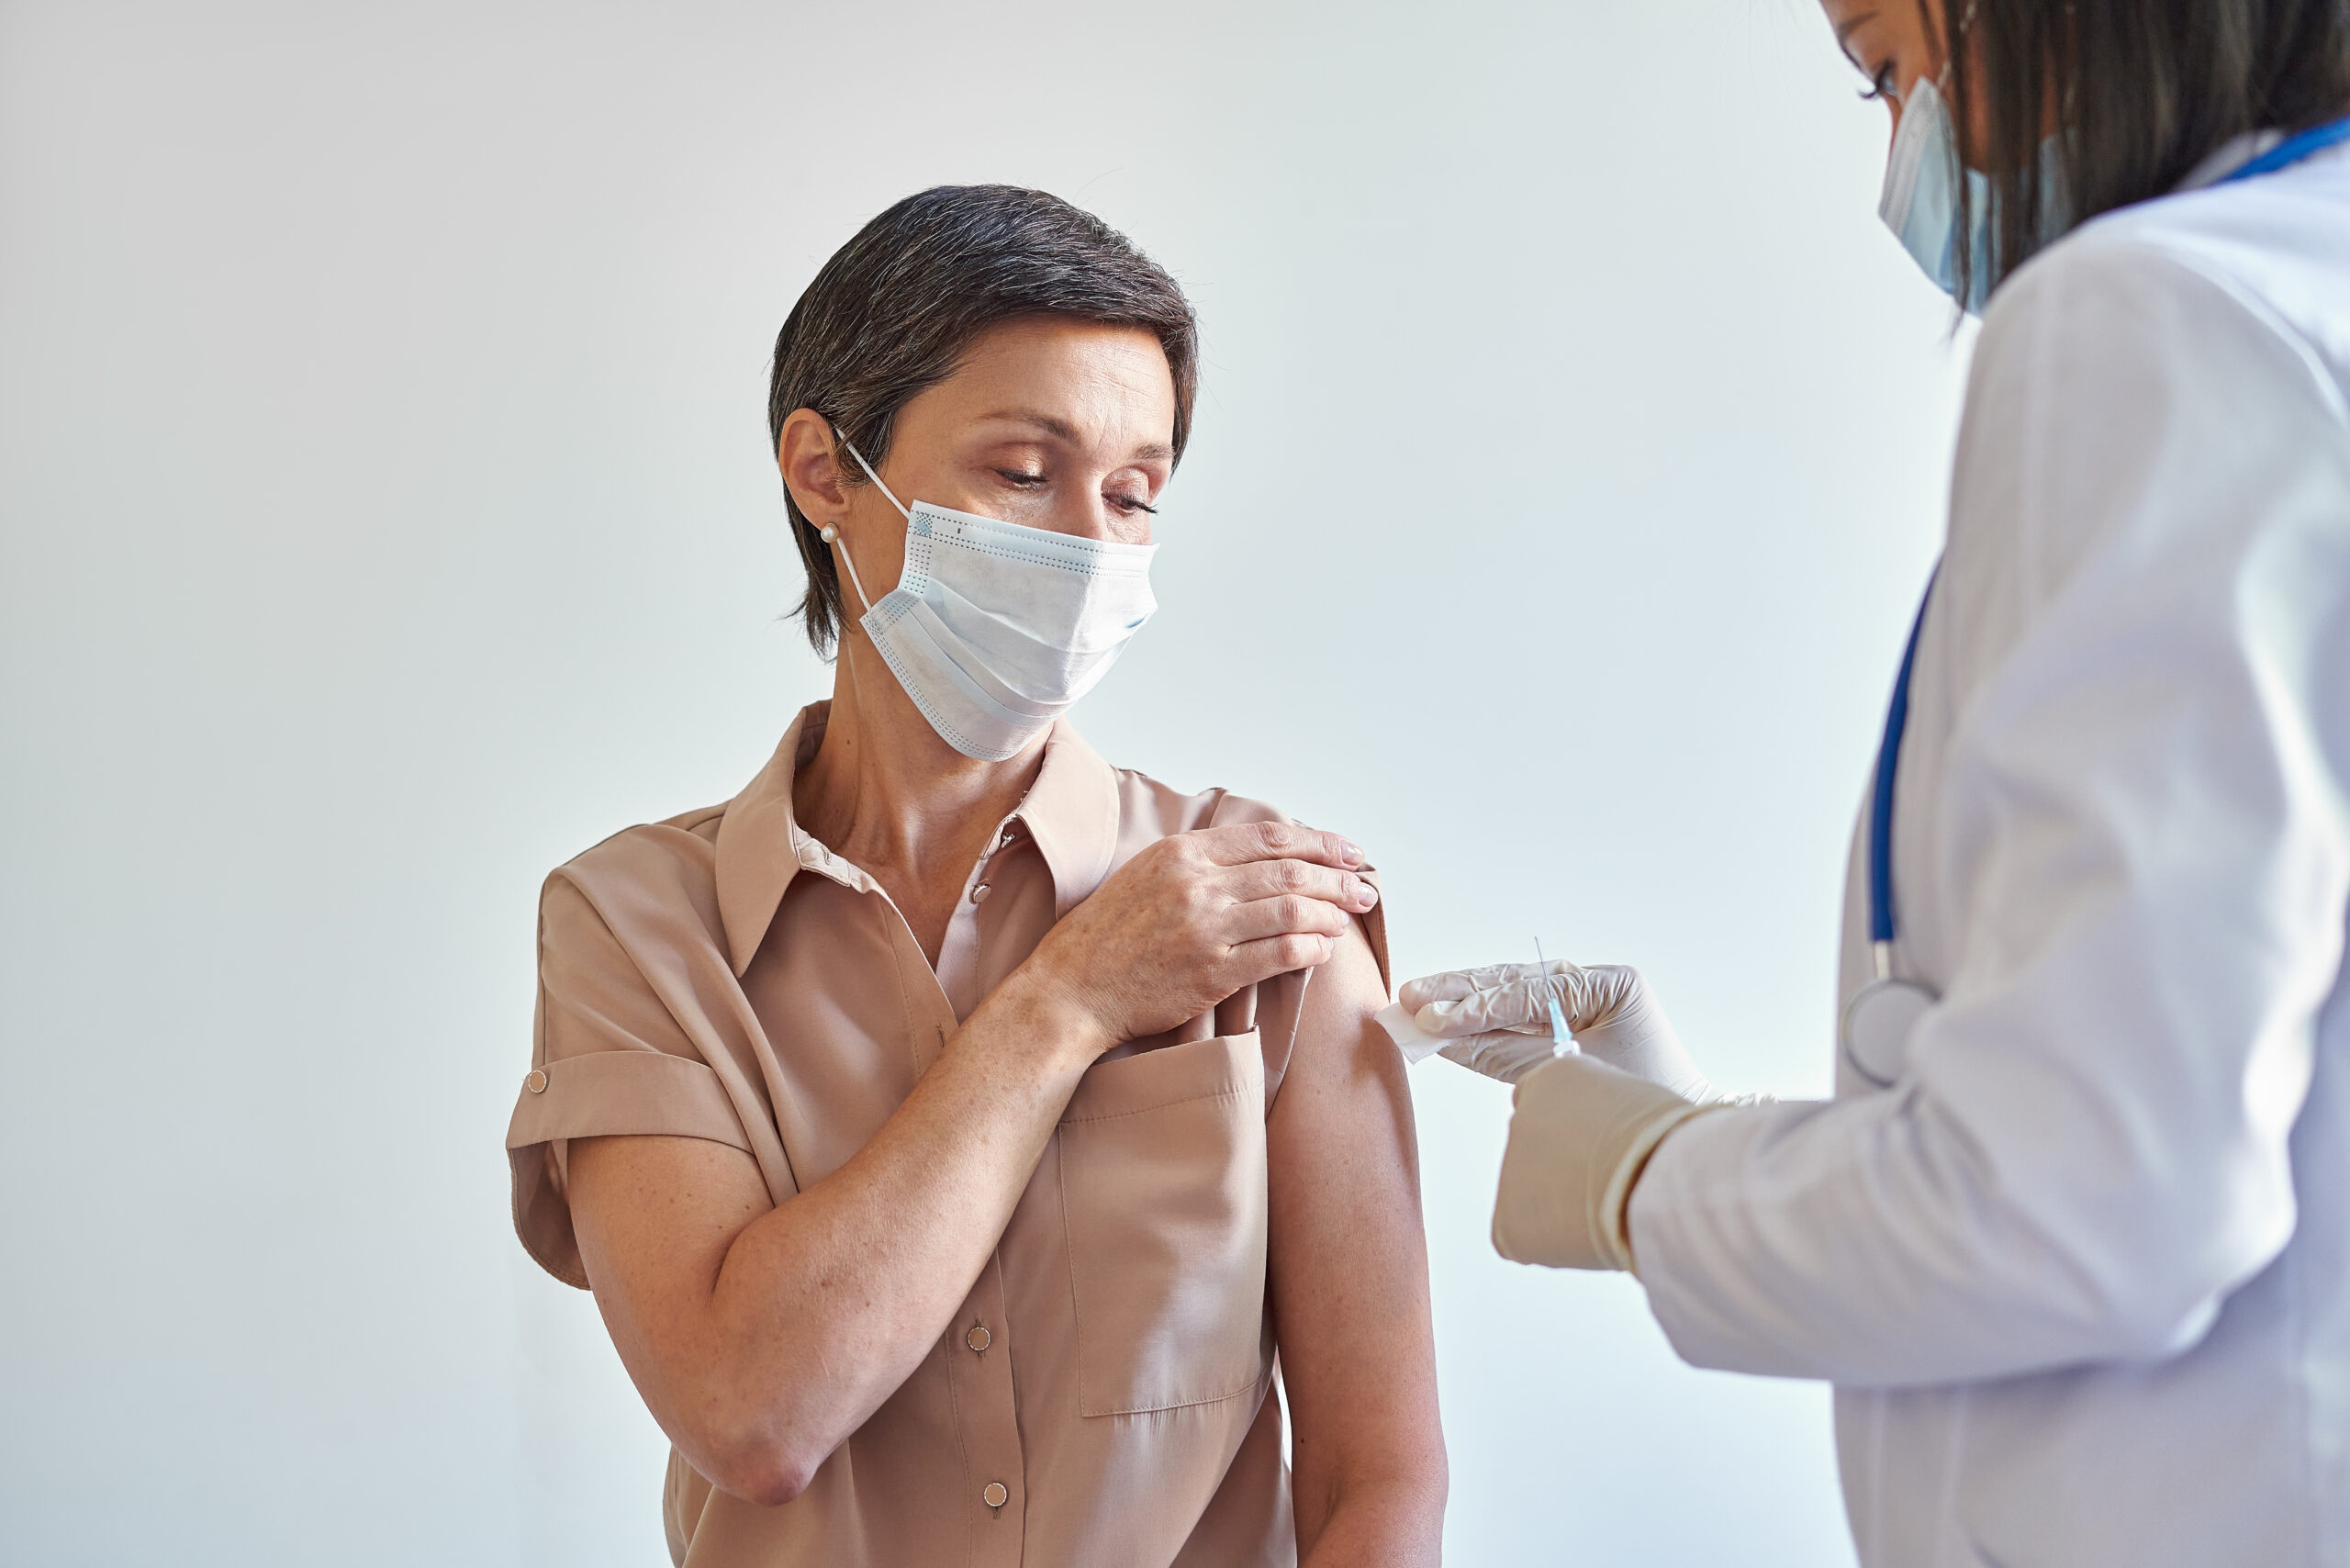 Middle aged woman wearing a mask receives a vaccine in her arm